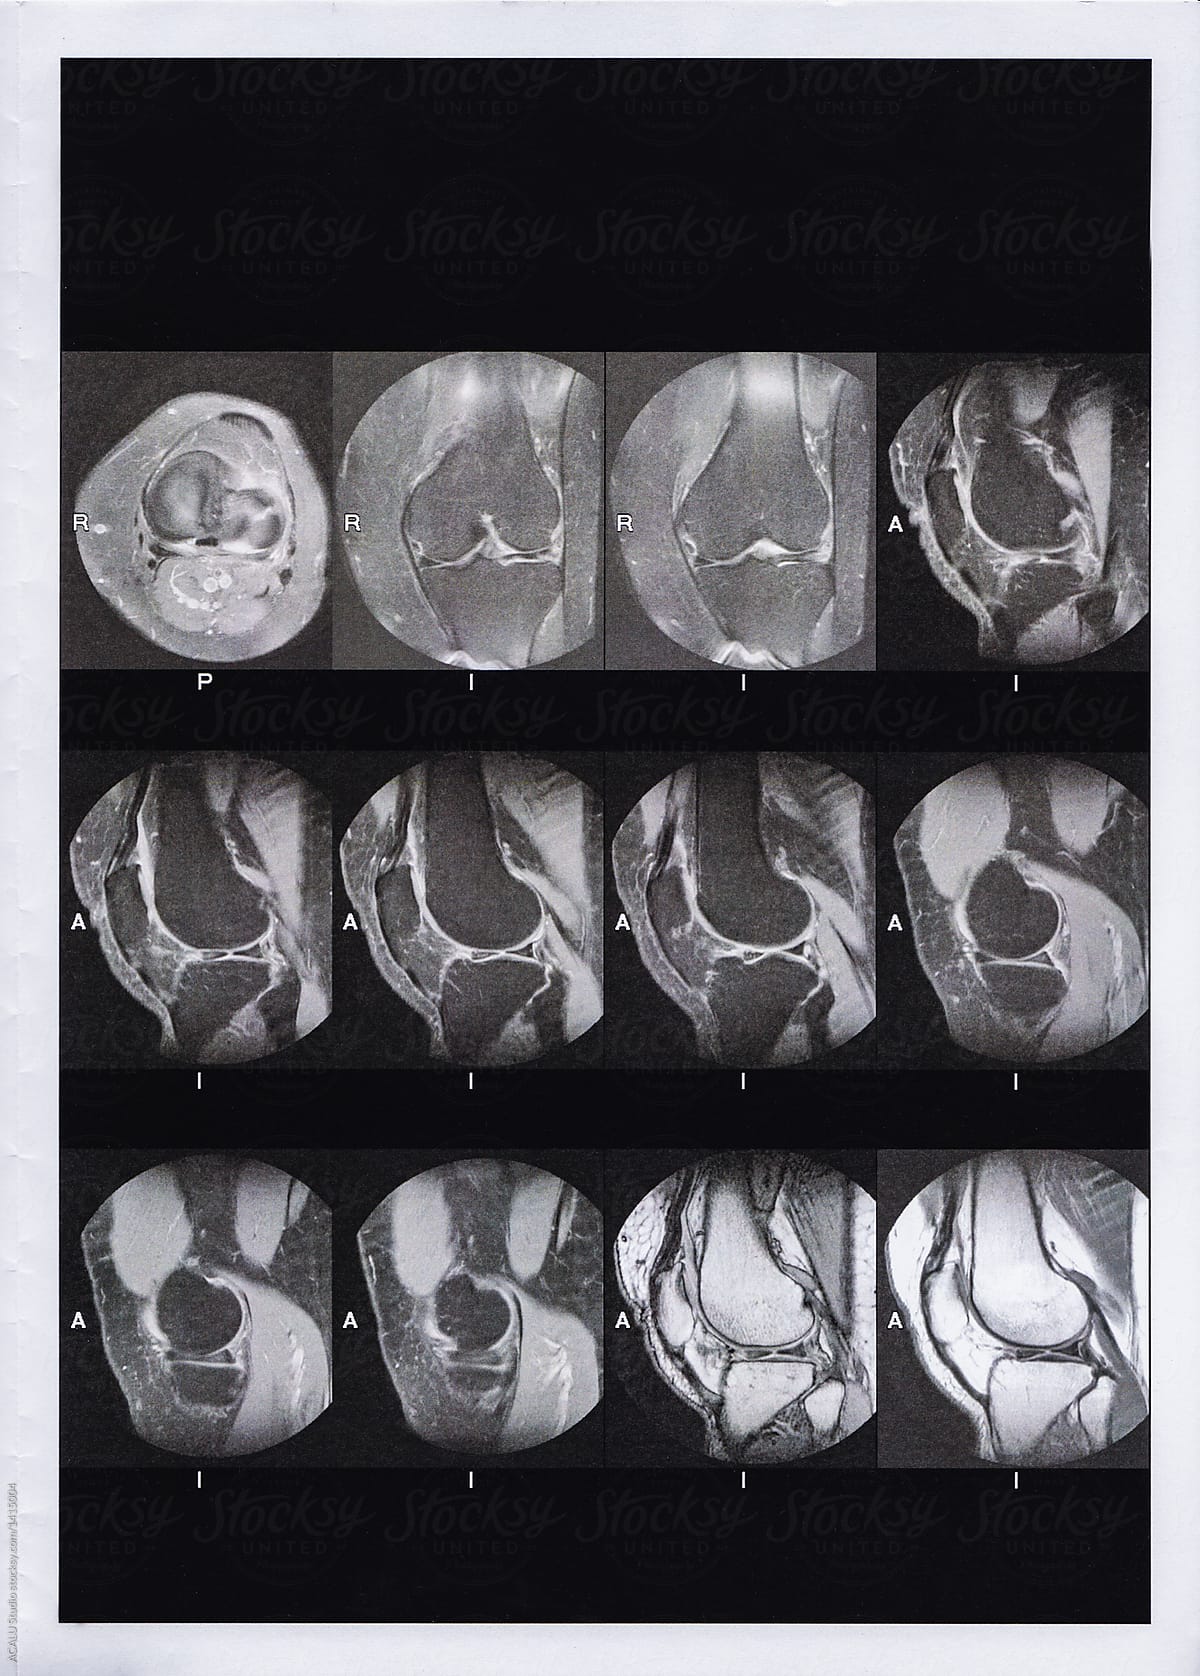 Sequence of x-rays of a knee